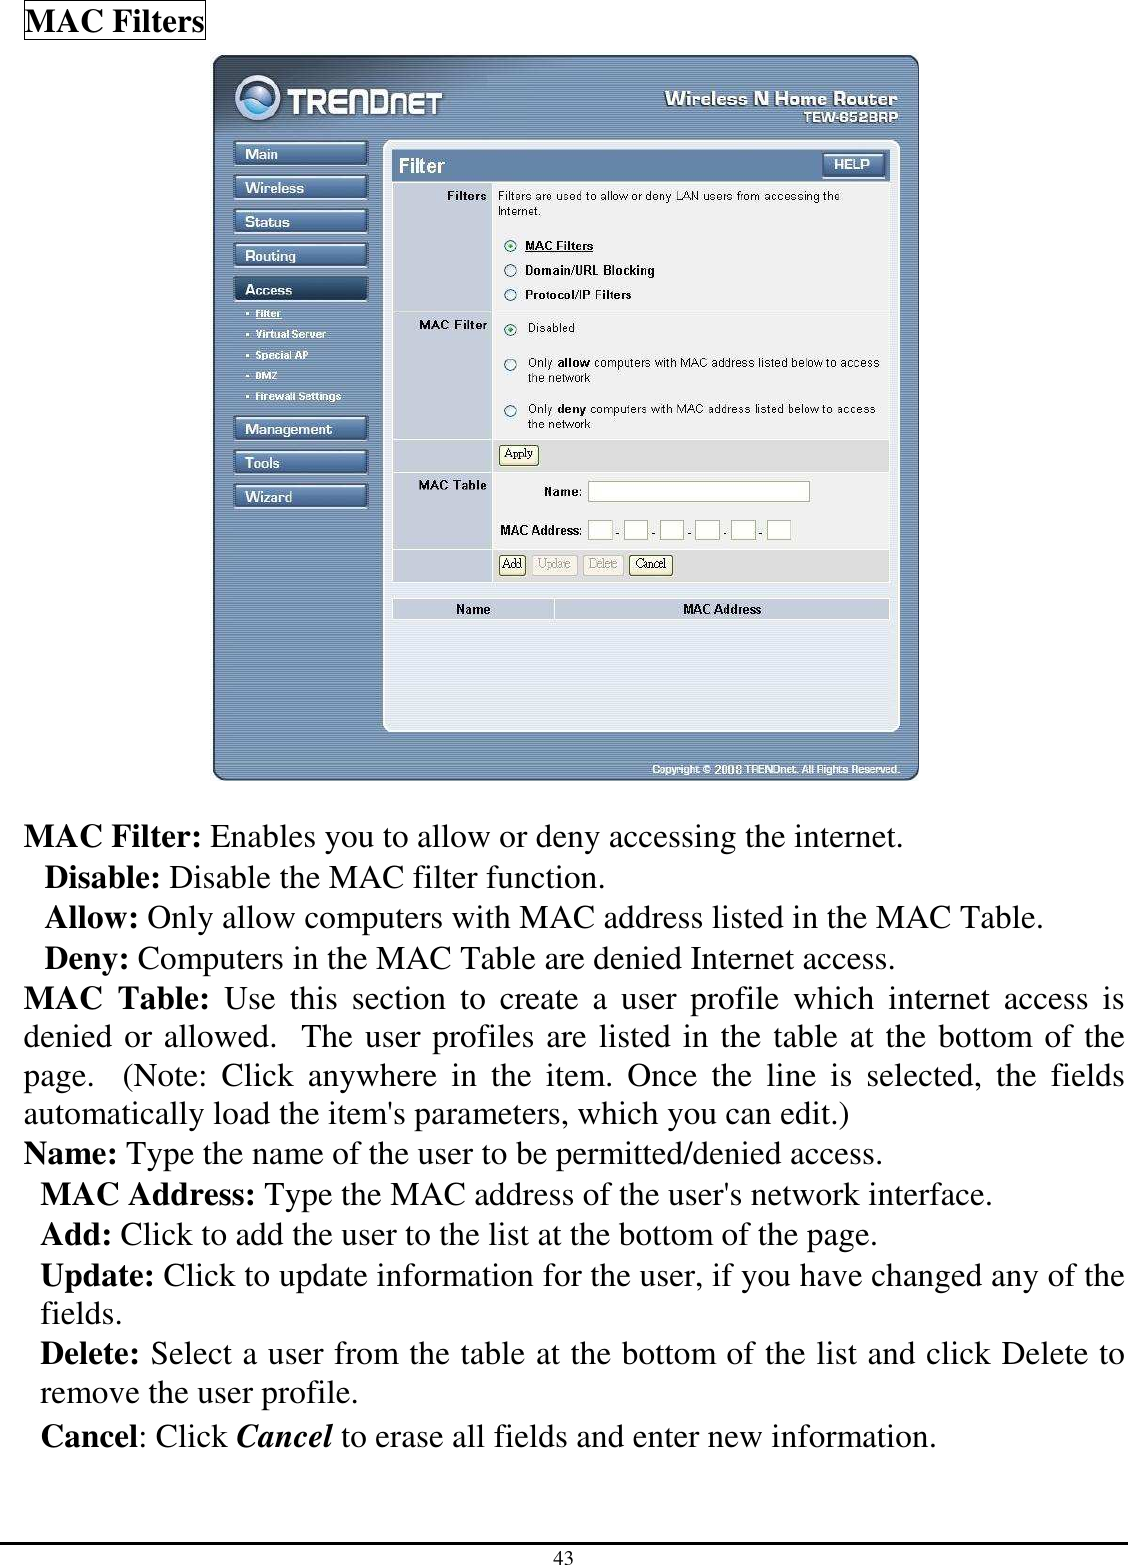 43 MAC Filters   MAC Filter: Enables you to allow or deny accessing the internet.  Disable: Disable the MAC filter function. Allow: Only allow computers with MAC address listed in the MAC Table. Deny: Computers in the MAC Table are denied Internet access. MAC  Table:  Use  this  section  to  create  a  user  profile  which  internet  access  is denied or allowed.  The user profiles are listed in the table at the bottom of the page.    (Note:  Click  anywhere  in  the  item.  Once  the  line  is  selected,  the  fields automatically load the item&apos;s parameters, which you can edit.) Name: Type the name of the user to be permitted/denied access. MAC Address: Type the MAC address of the user&apos;s network interface. Add: Click to add the user to the list at the bottom of the page. Update: Click to update information for the user, if you have changed any of the fields. Delete: Select a user from the table at the bottom of the list and click Delete to remove the user profile. Cancel: Click Cancel to erase all fields and enter new information. 